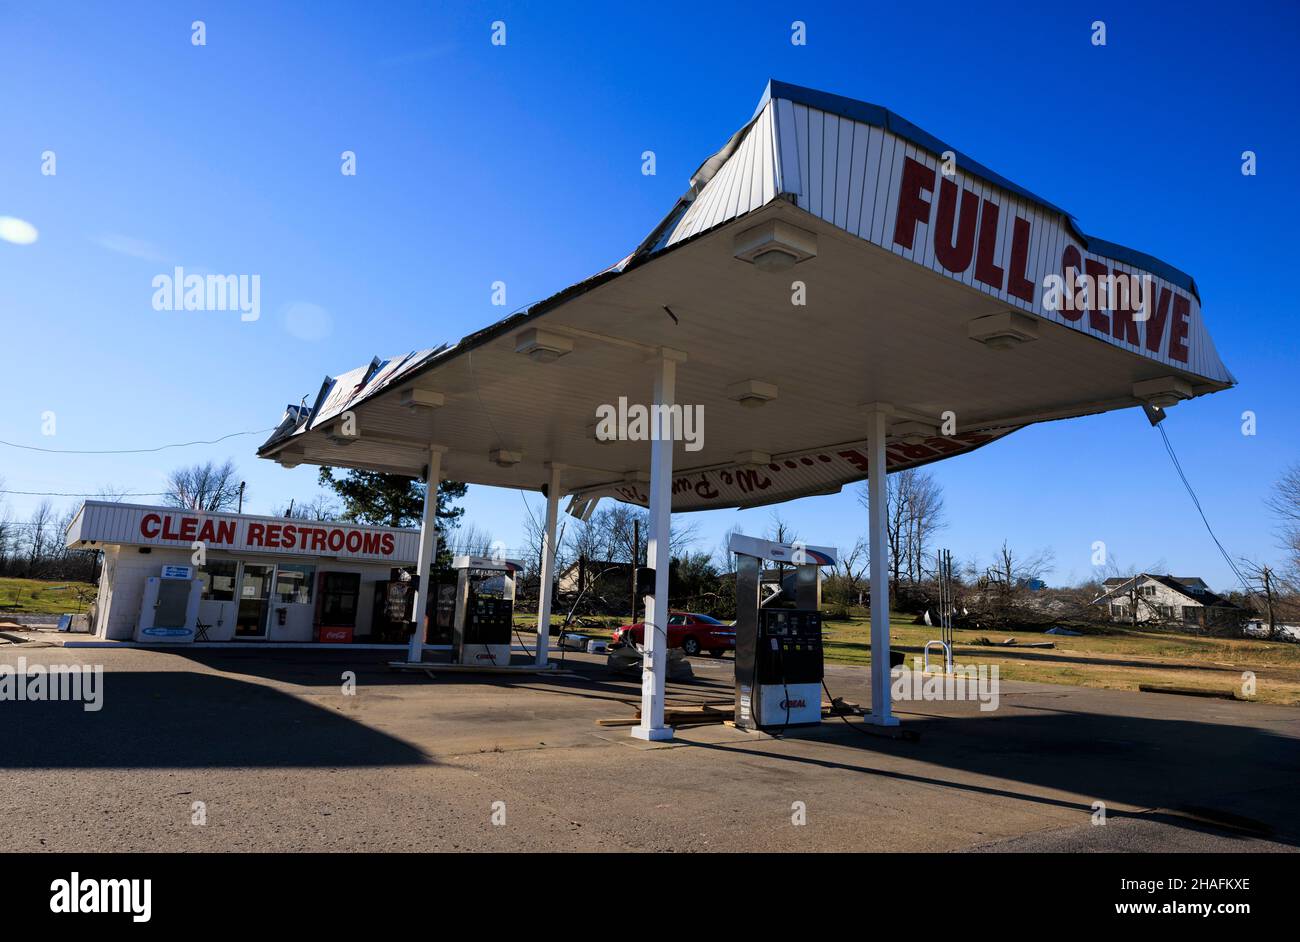 DAWSON SPRINGS, KENTUCKY - DECEMBER 12: A gas station is damaged after a tornado tore through rural Kentucky on December 12, 2021 in Dawson Springs, Kentucky. Multiple tornadoes touched down in several midwestern states late Friday evening causing widespread destruction and leaving an estimated 70-plus people dead. Stock Photo